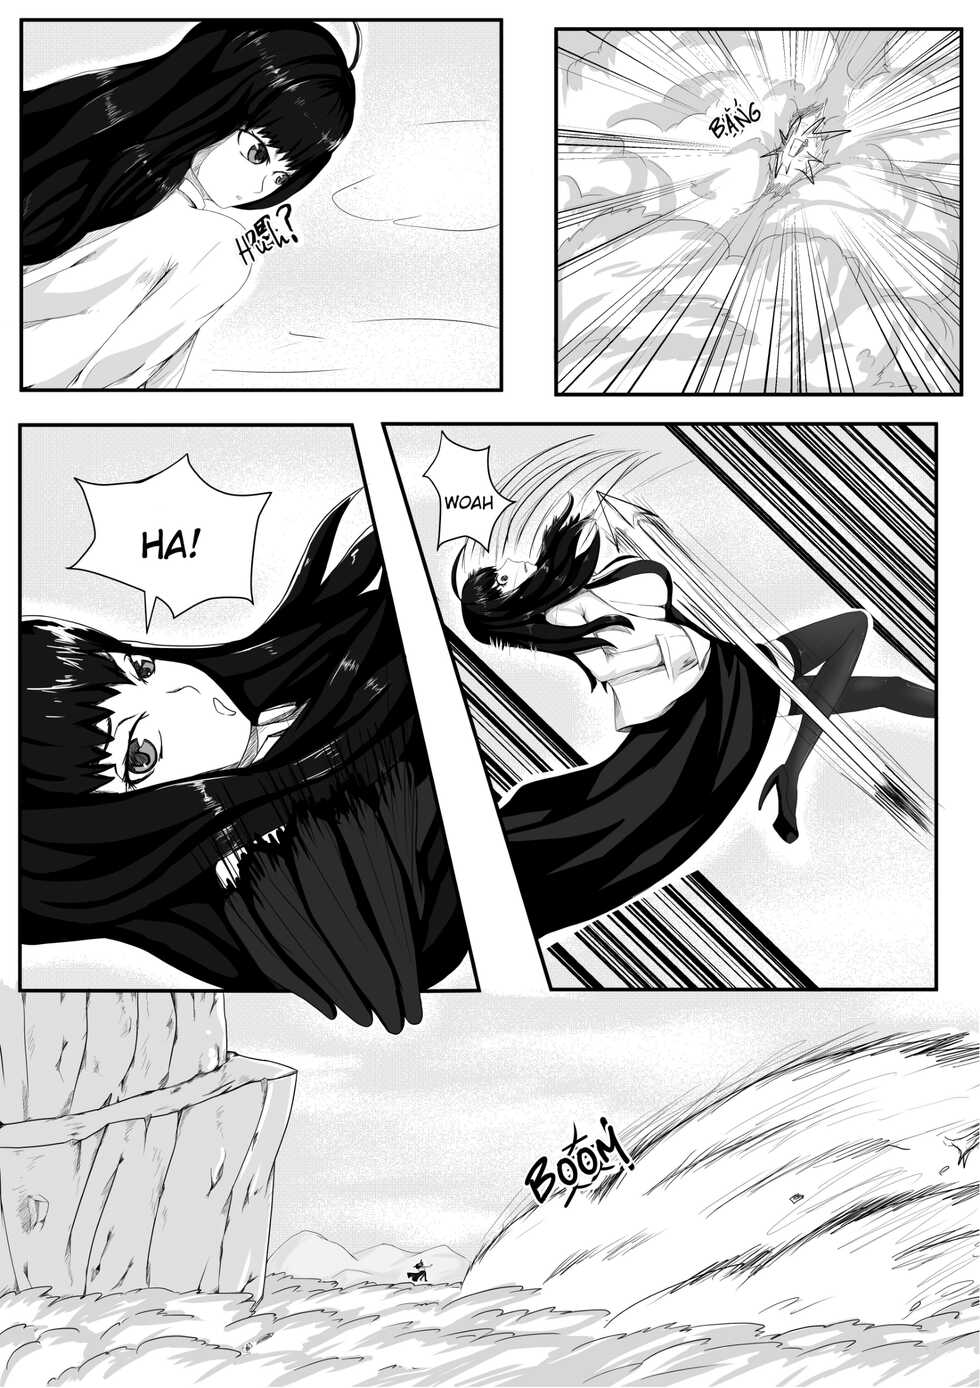 [HLL.ALSG99] Crimson Witch 1 [English][Pixiv] - Page 4